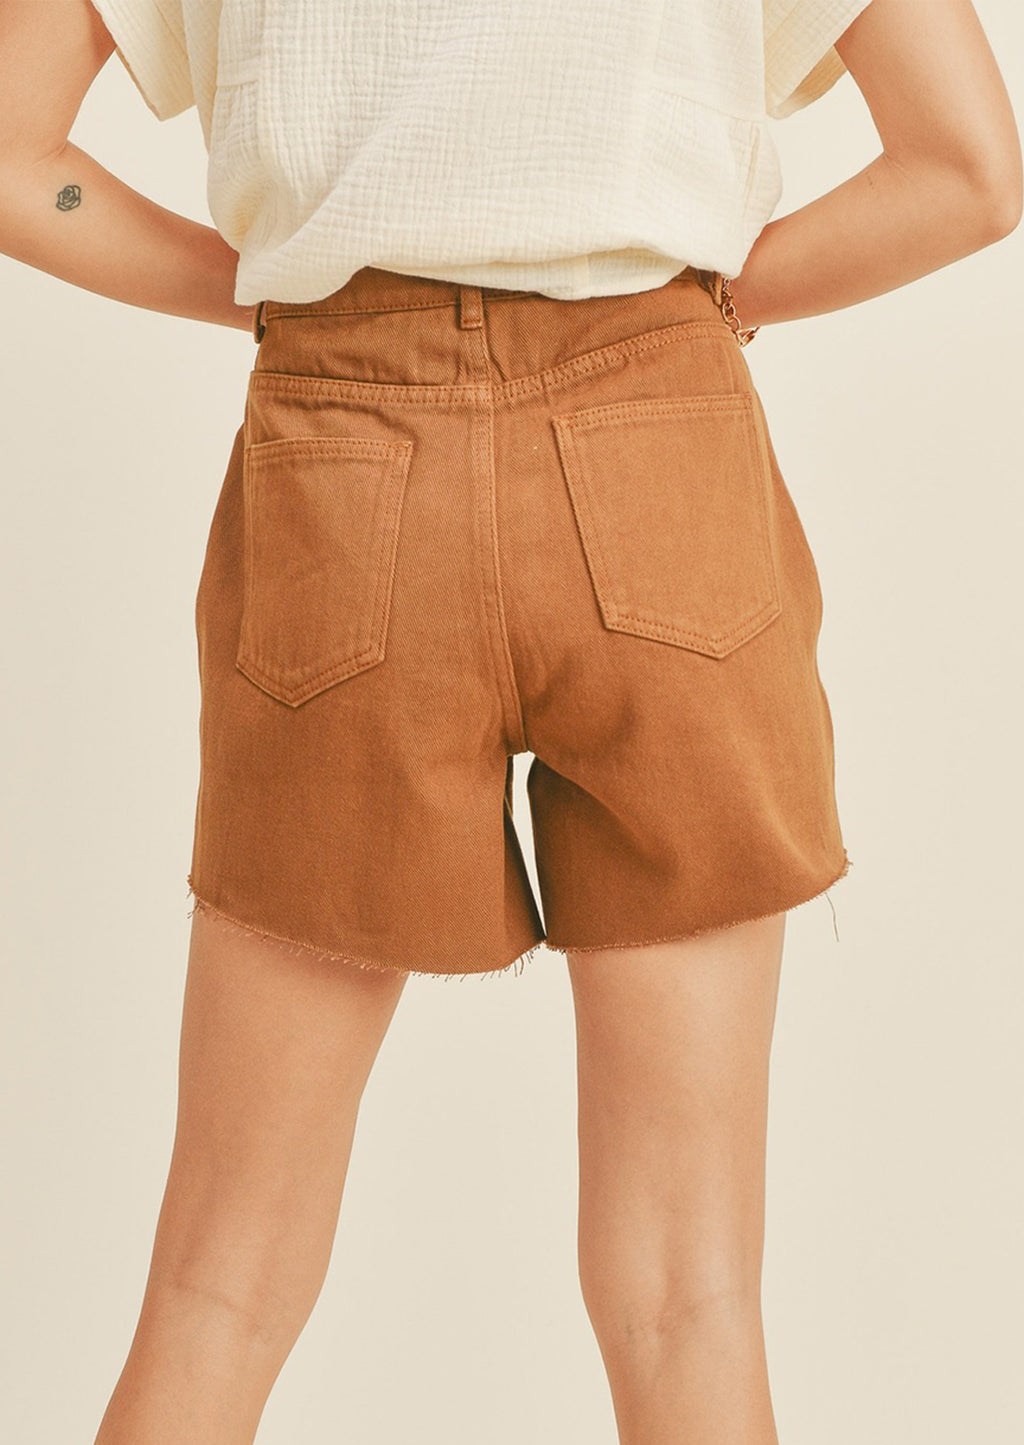 2: A woman in light brown denim shorts, seen from behind. 